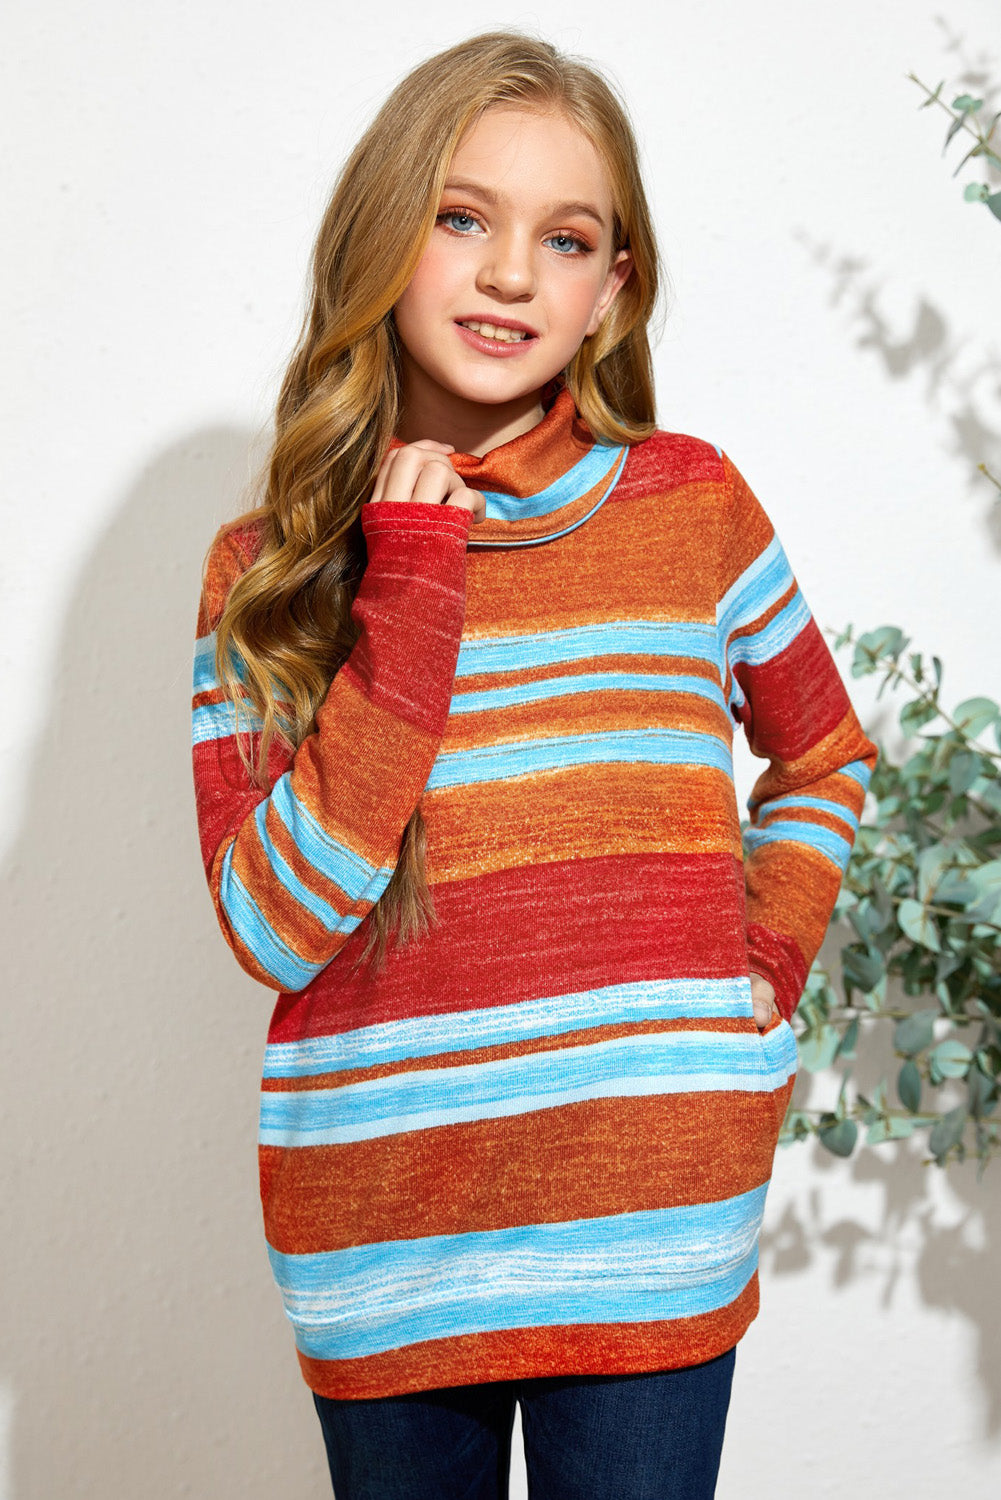 Girls Striped Cowl Neck Top with Pockets-Sweater-PureDesignTees